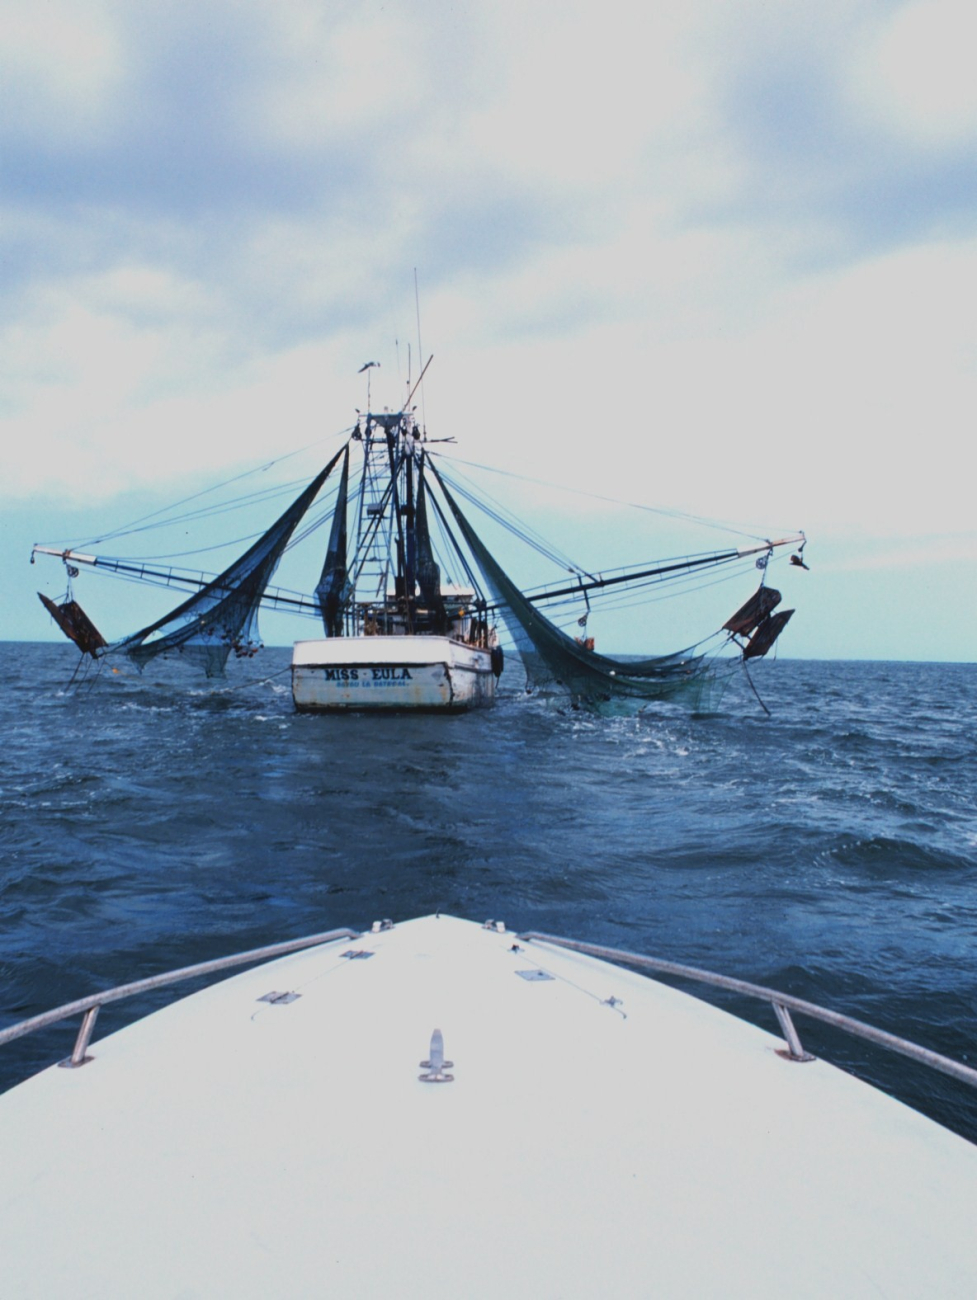 Nets and otterboards hanging outboard on the MISS EULA, a Vietnamese-Americanowned shrimp trawler operating in the Gulf of Mexico